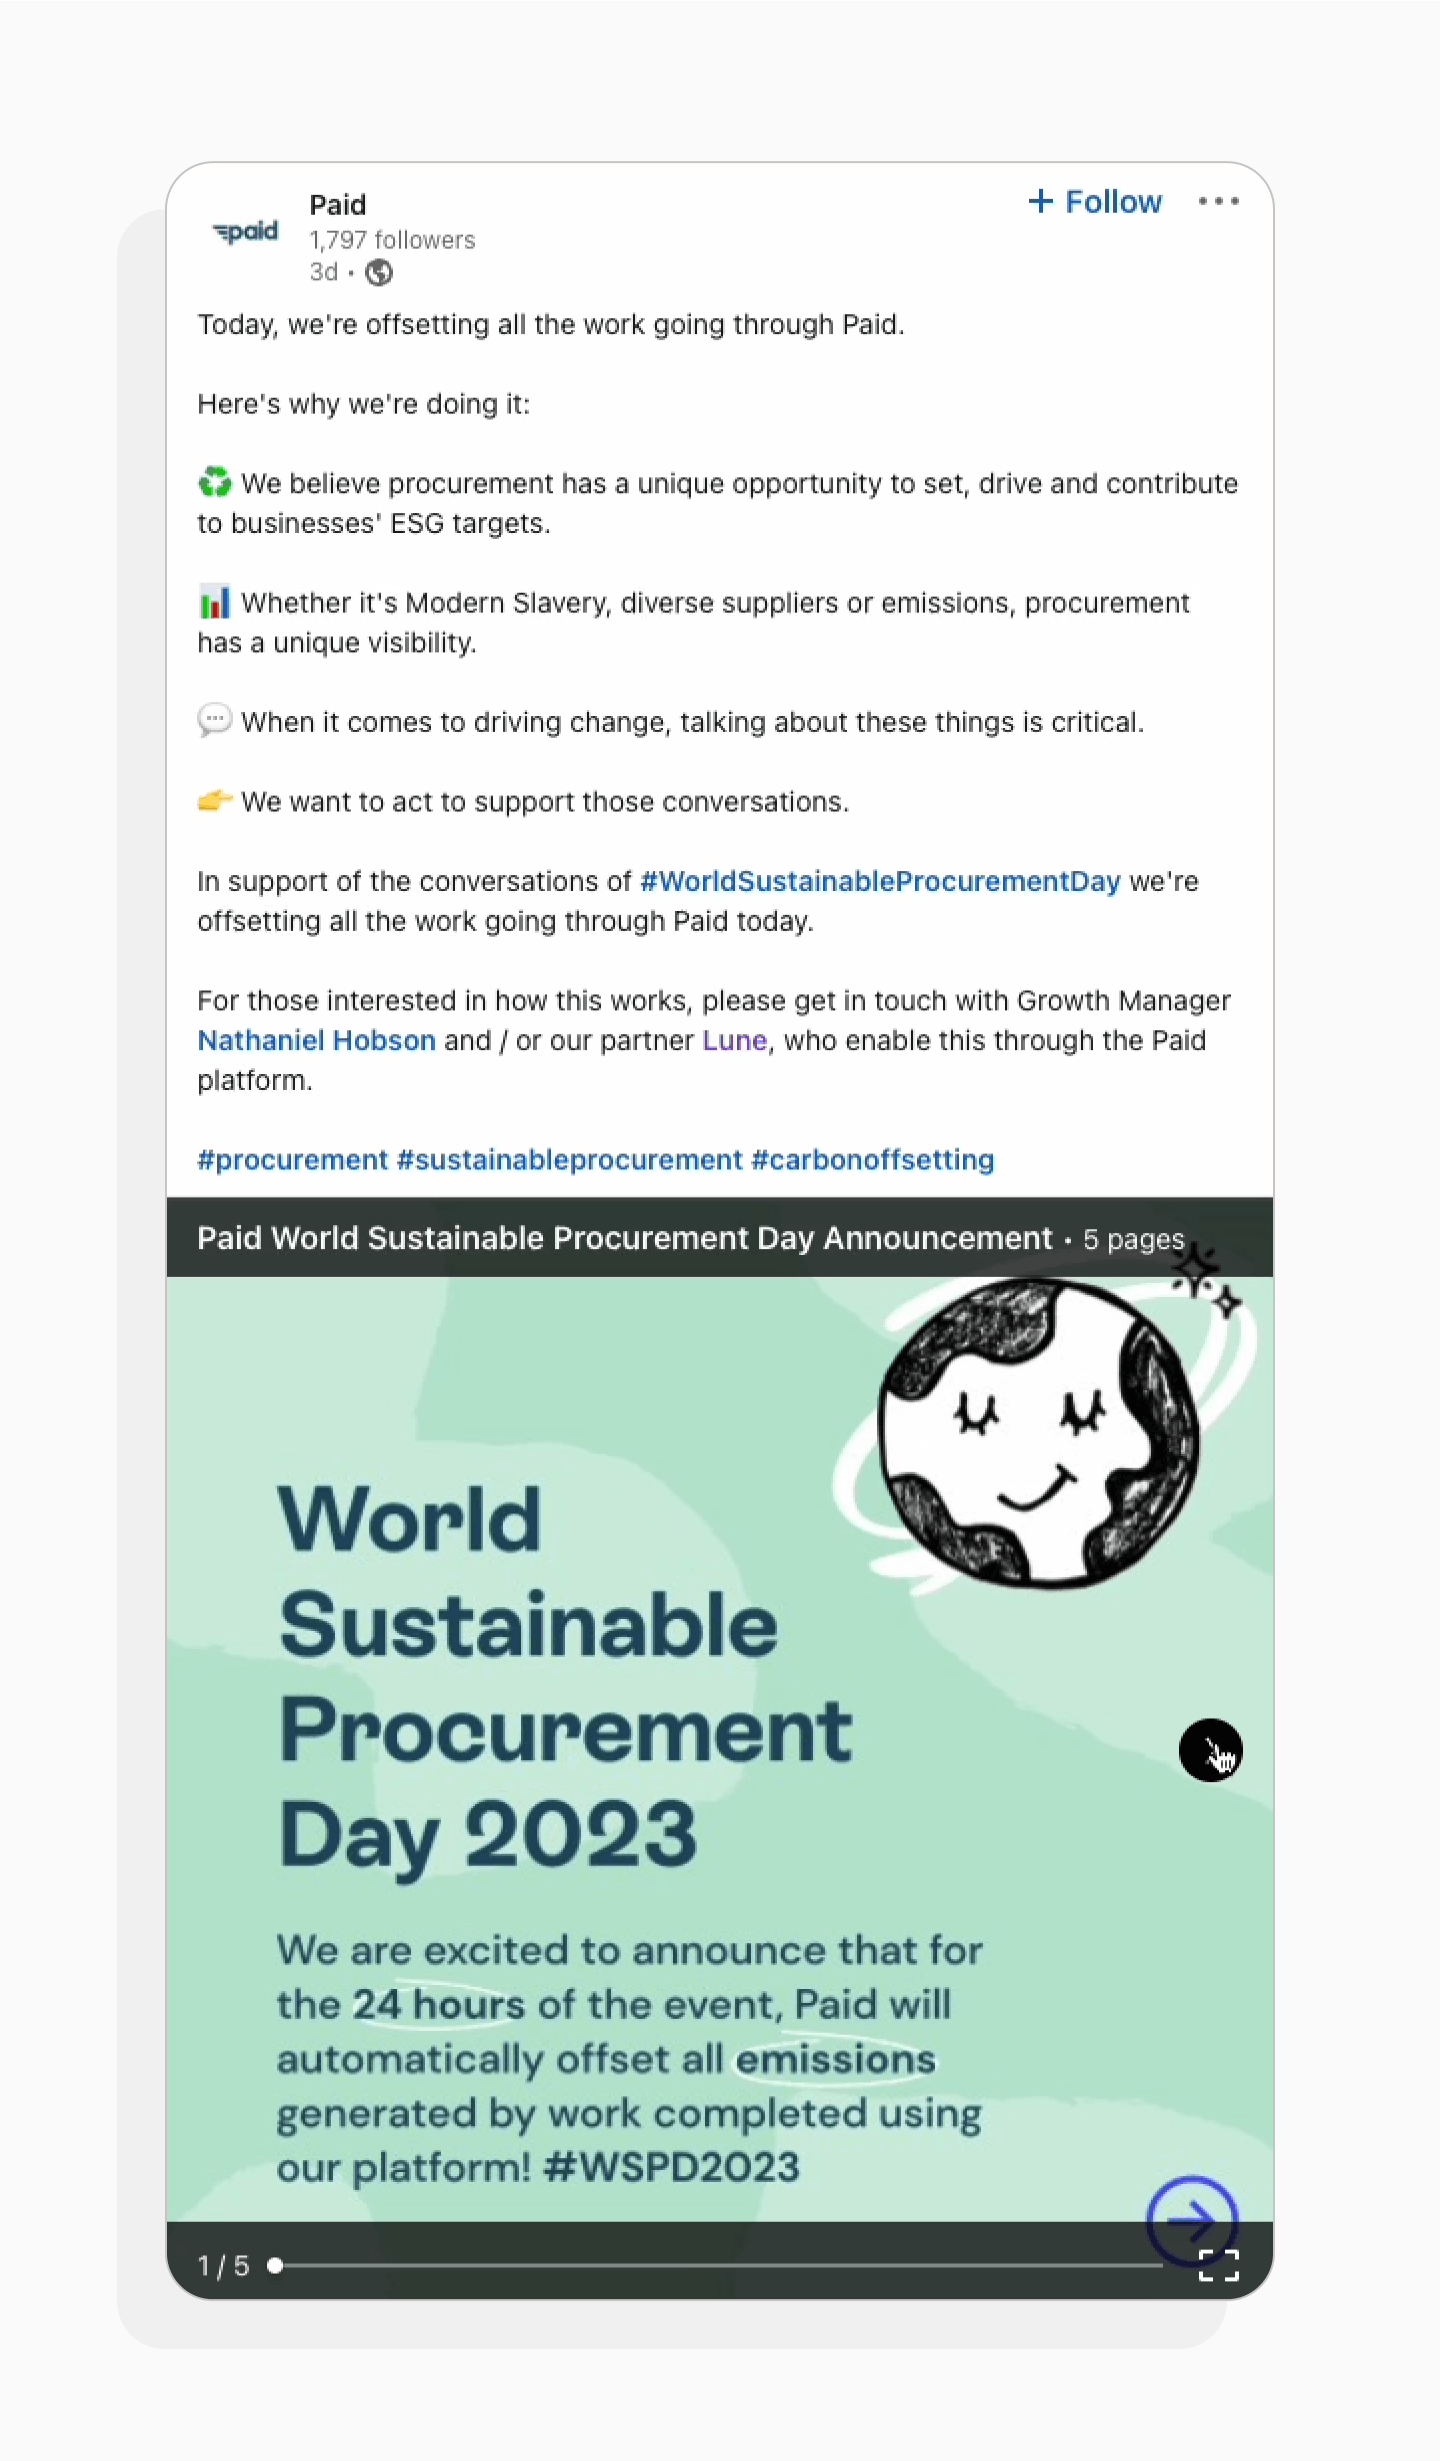 LinkedIn post showing Paid's World Sustainable Procurement Day initiative